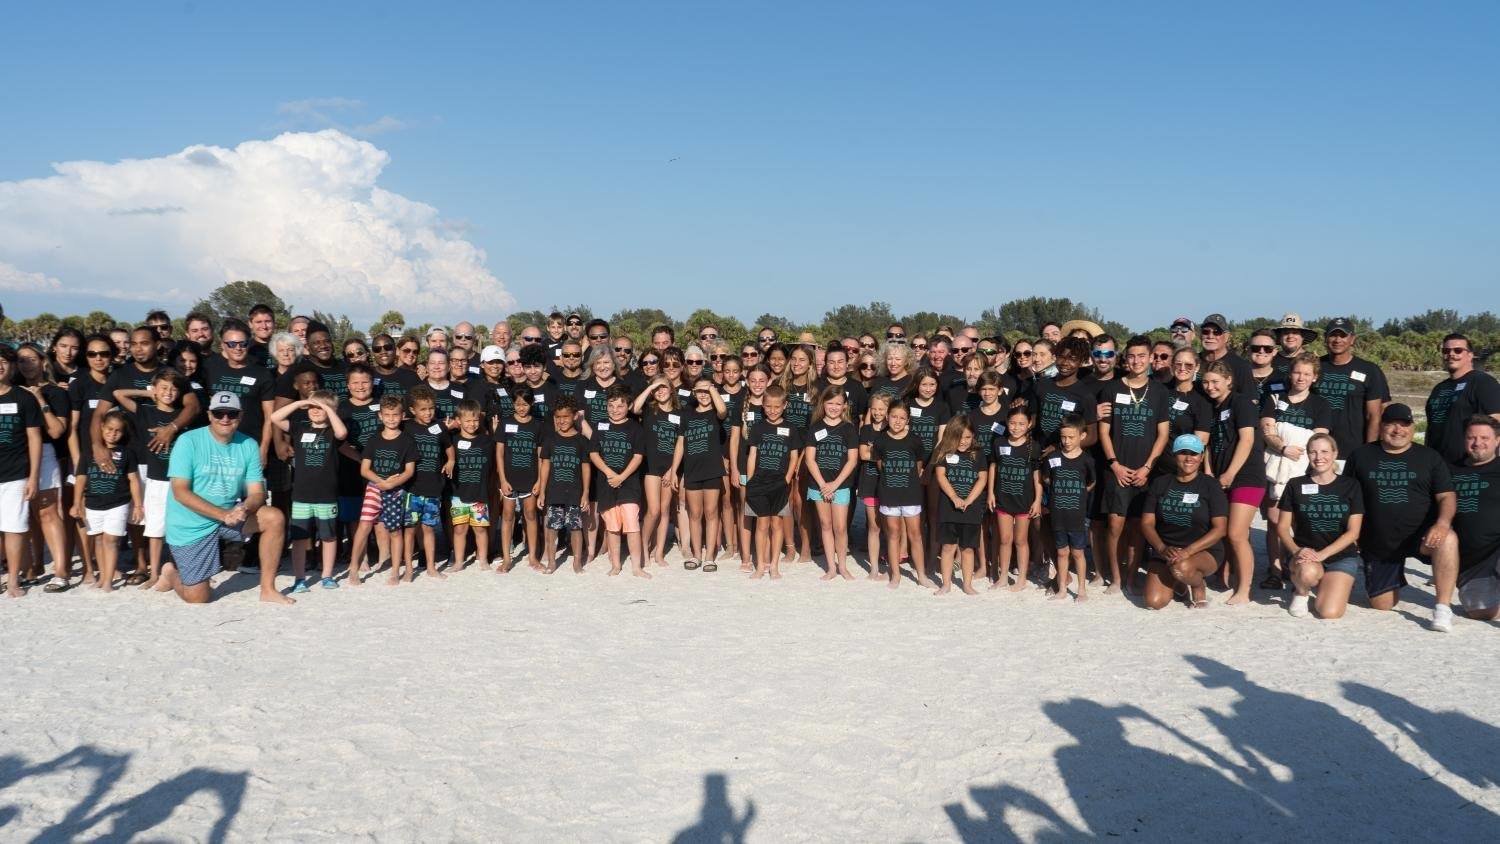 Calvary Church Pastor Willy Rice, kneeling in blue shirt, gathers with more than 130 new believers who took part in the church's beach baptism service May 15. (Photo from Willy Rice/Twitter)